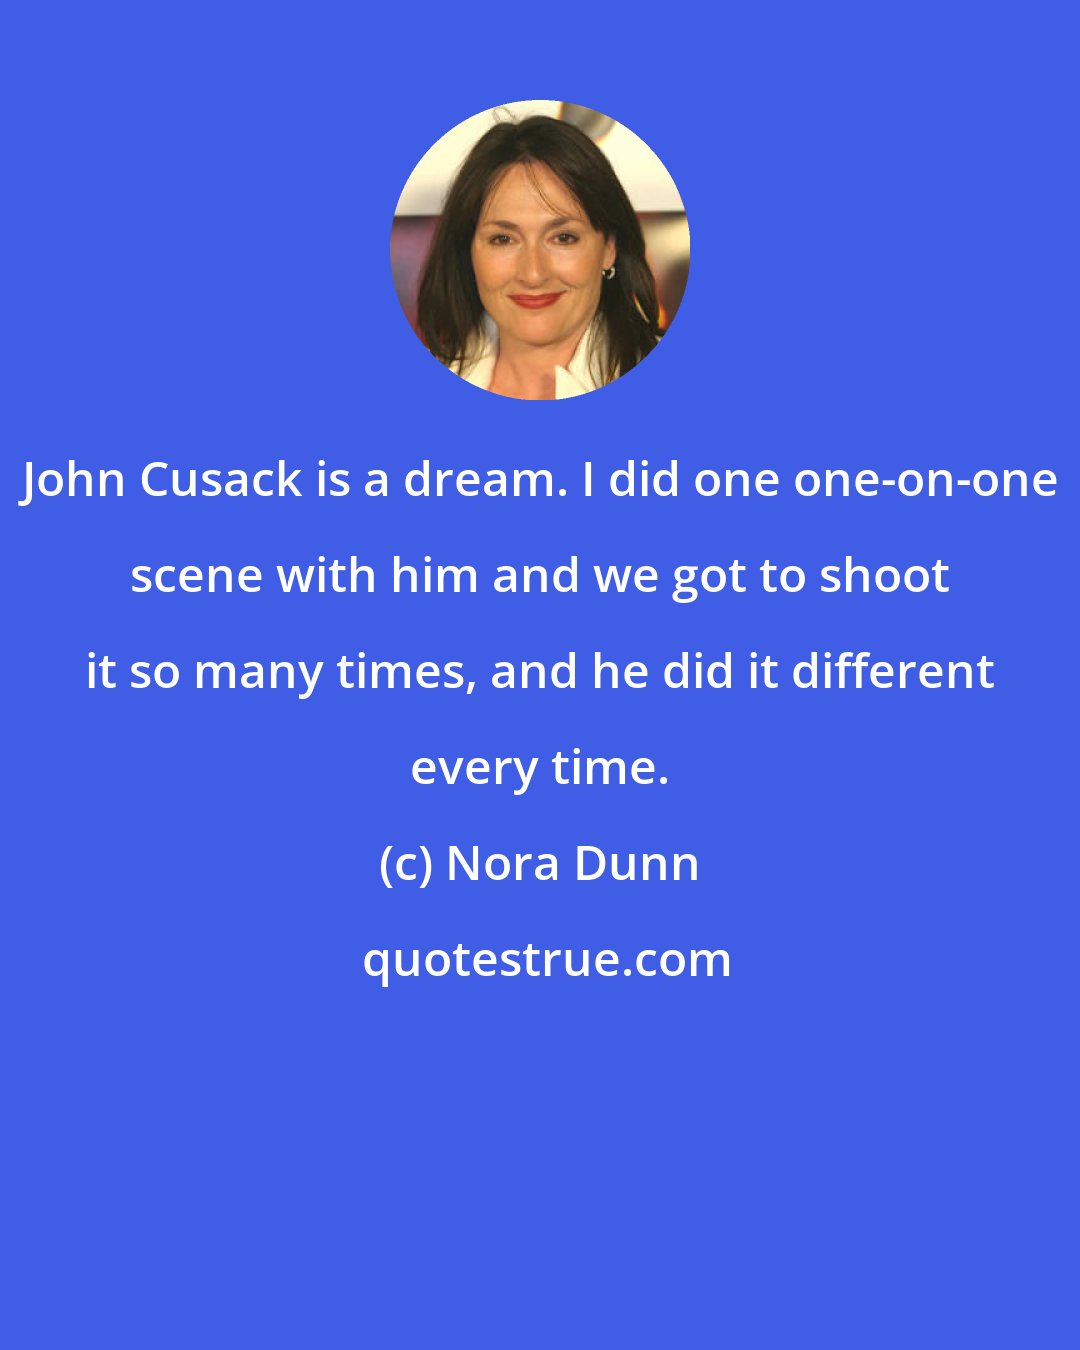 Nora Dunn: John Cusack is a dream. I did one one-on-one scene with him and we got to shoot it so many times, and he did it different every time.